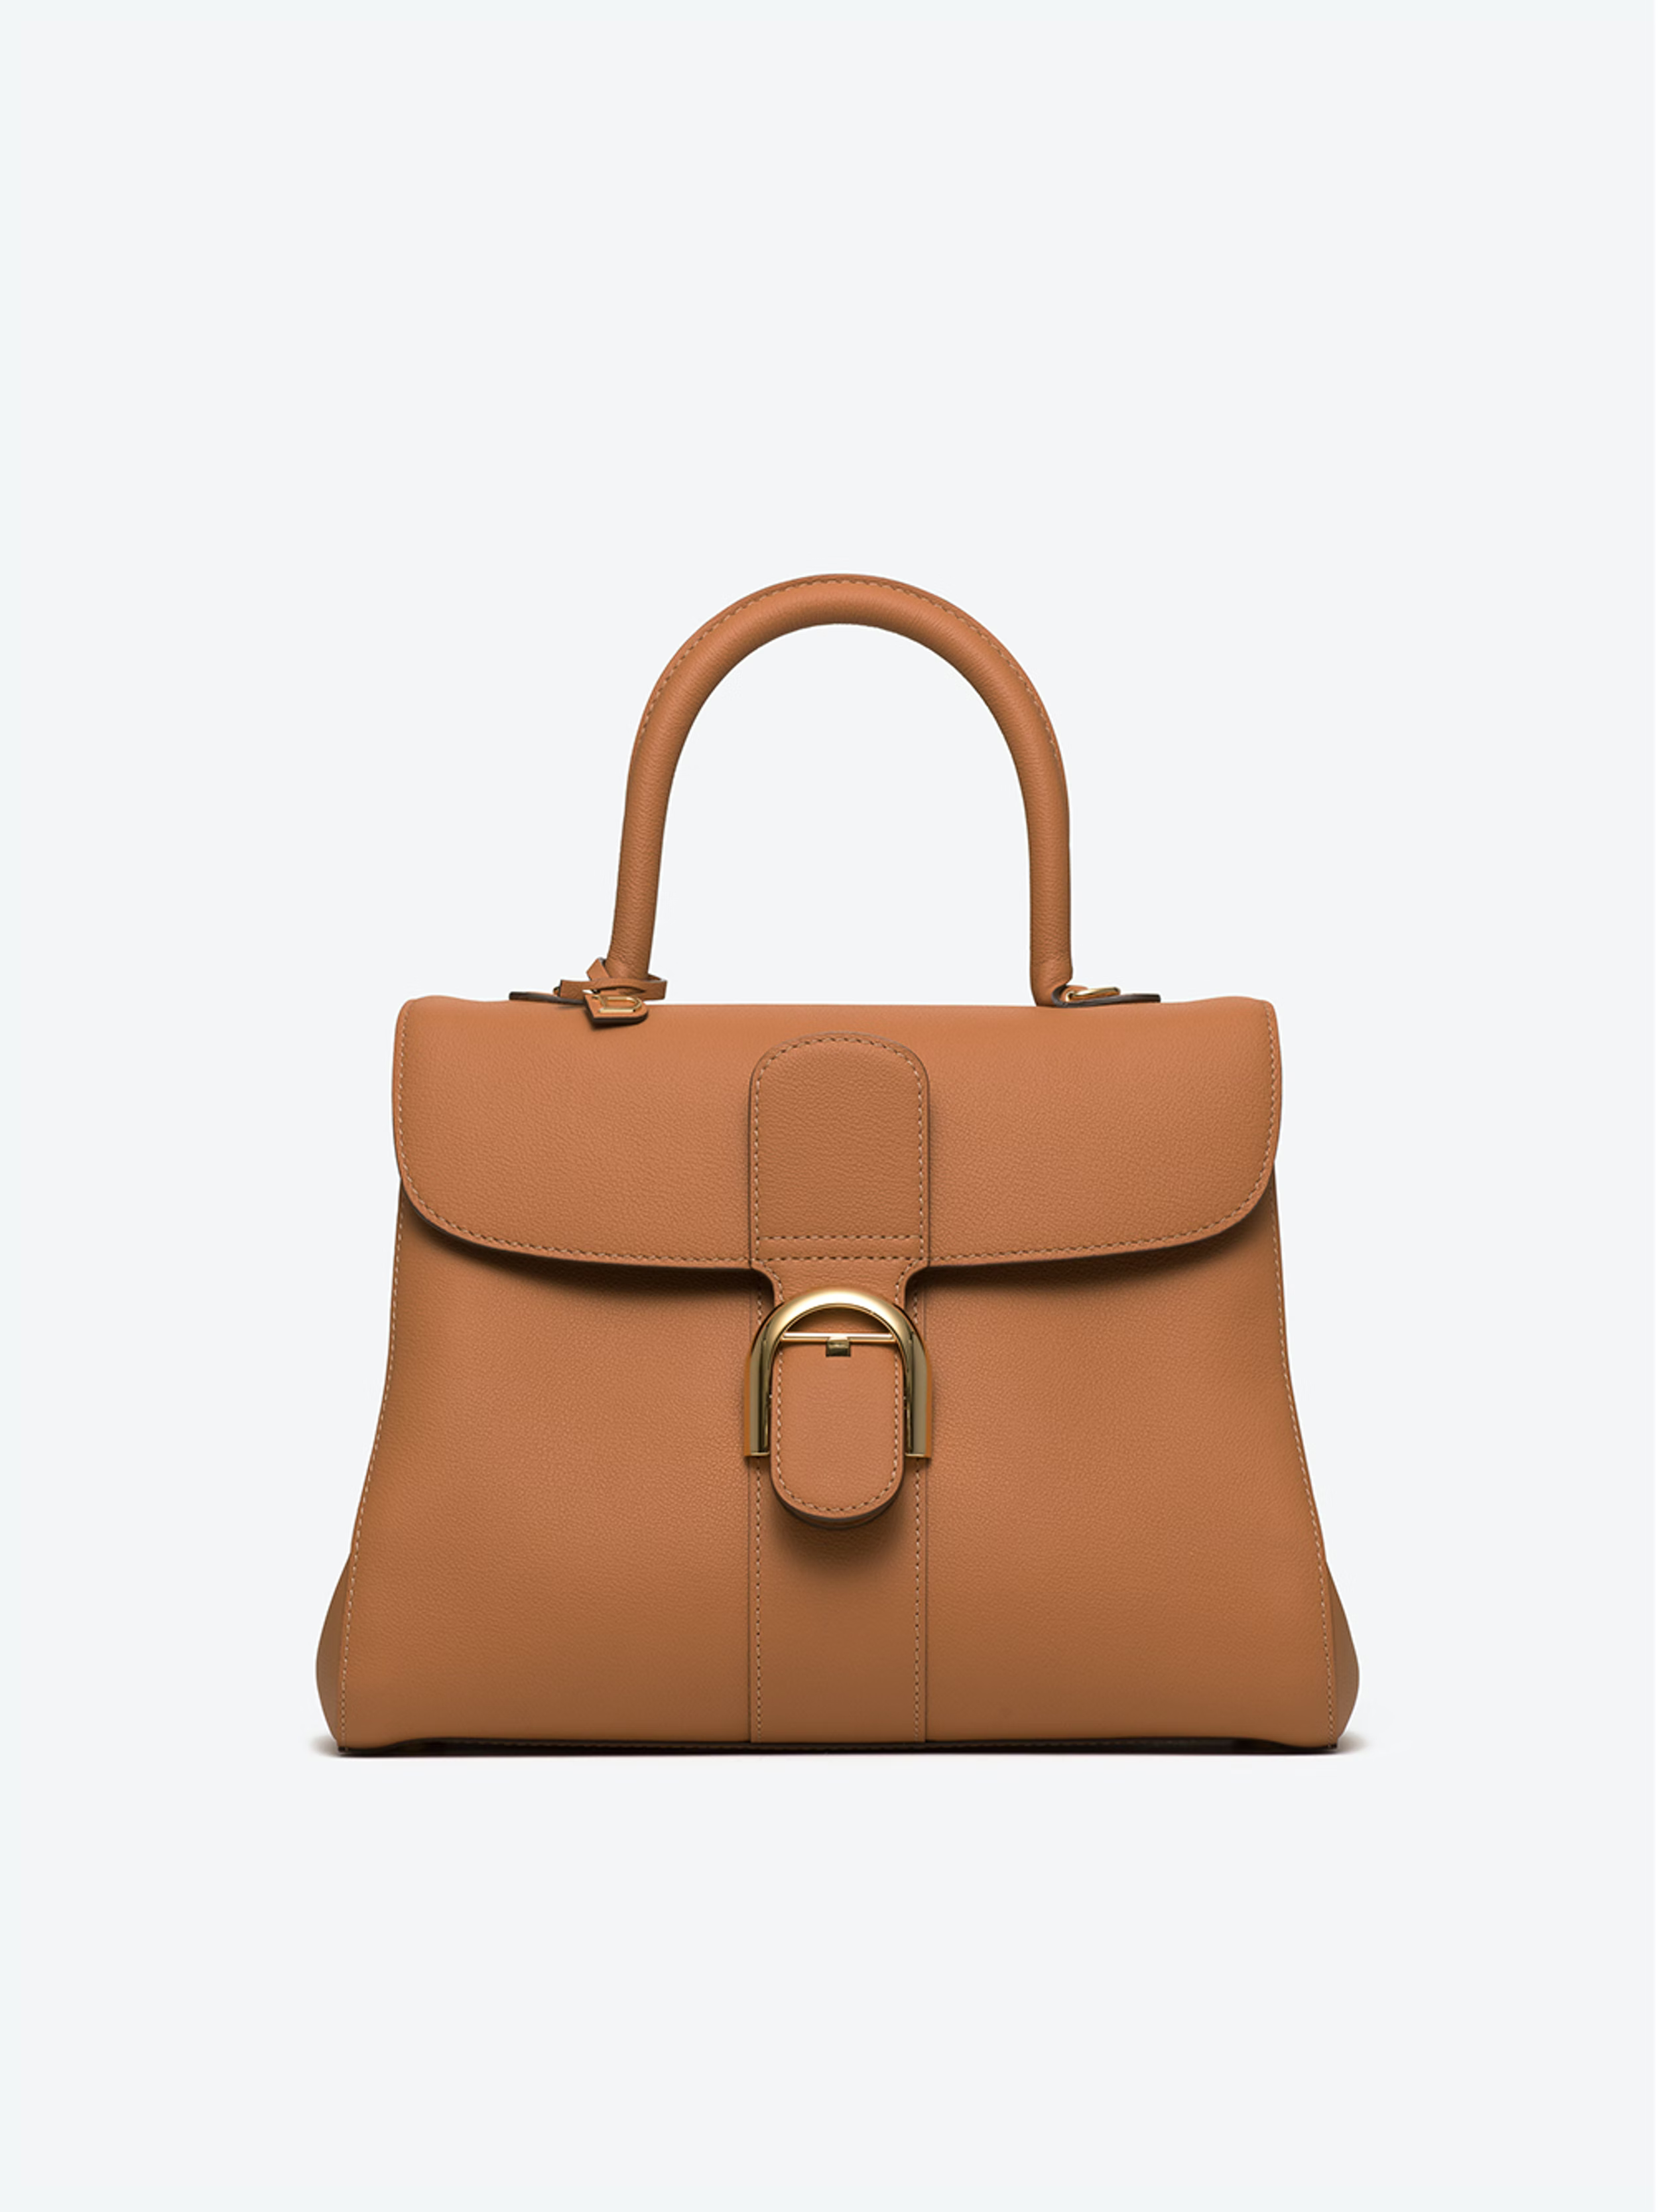 Delvaux Bags: A Belgian Legacy of Elegance and Luxury – VS Lifestyles